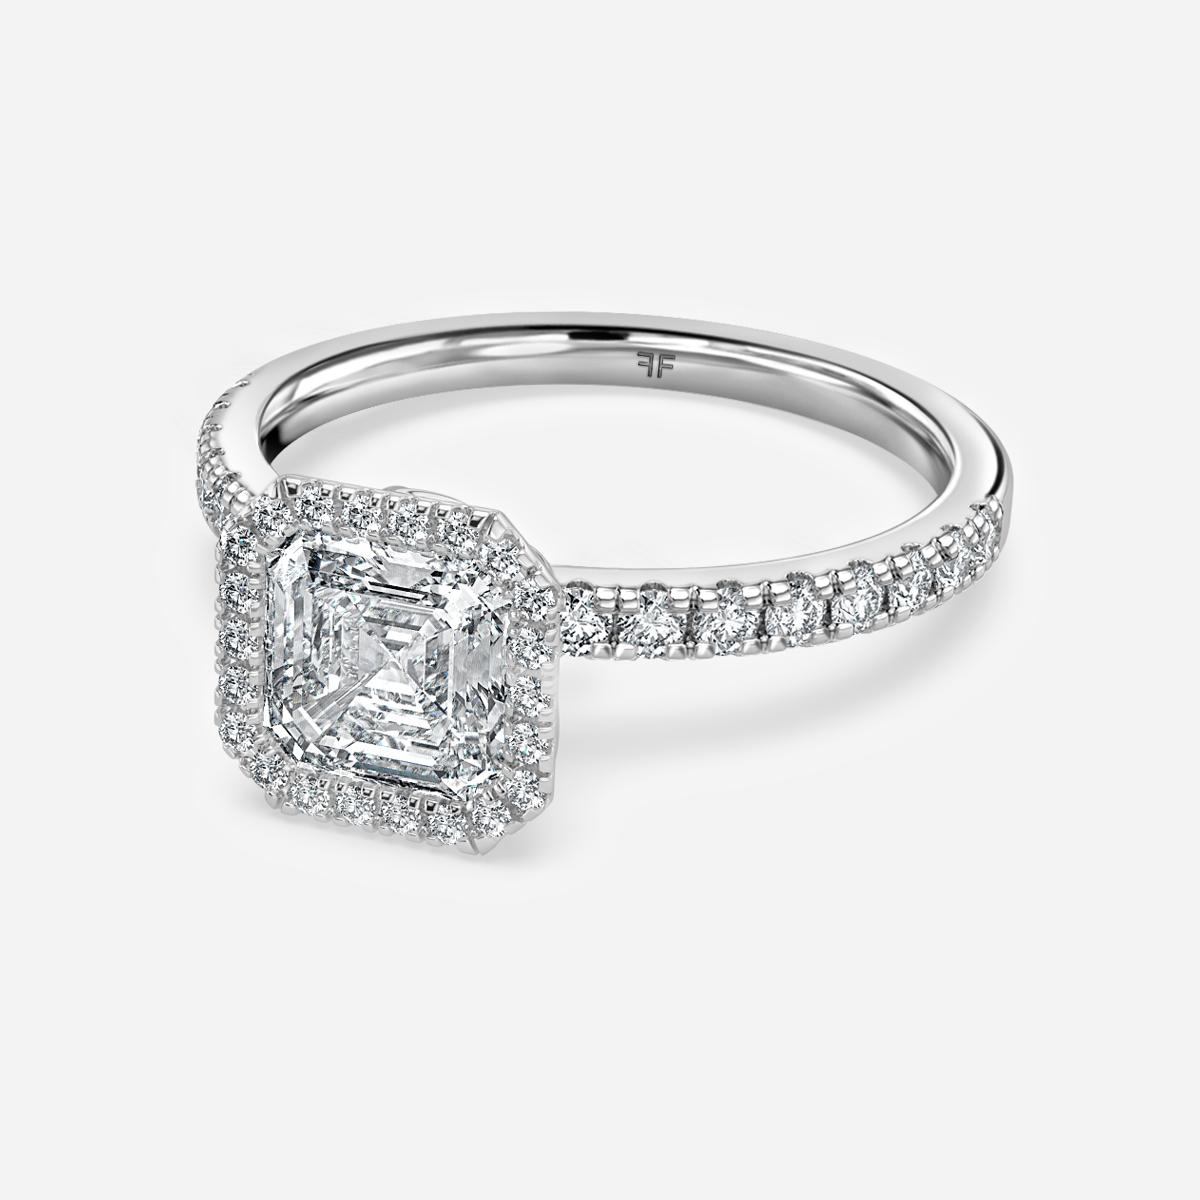 Lóis White Gold Halo Engagement Ring